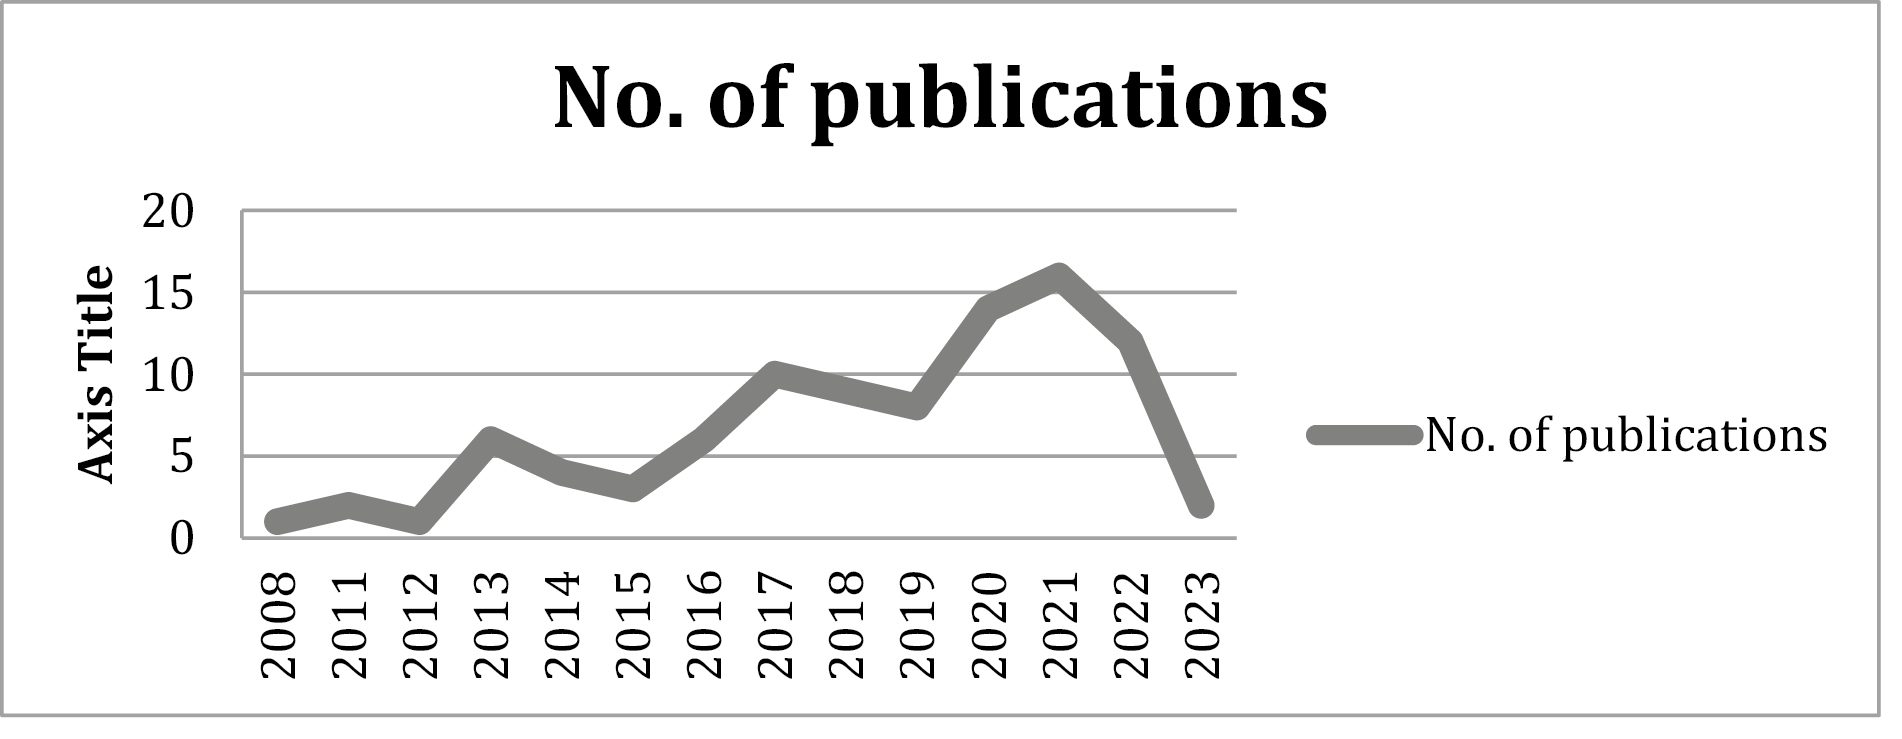 Number of publications per year.